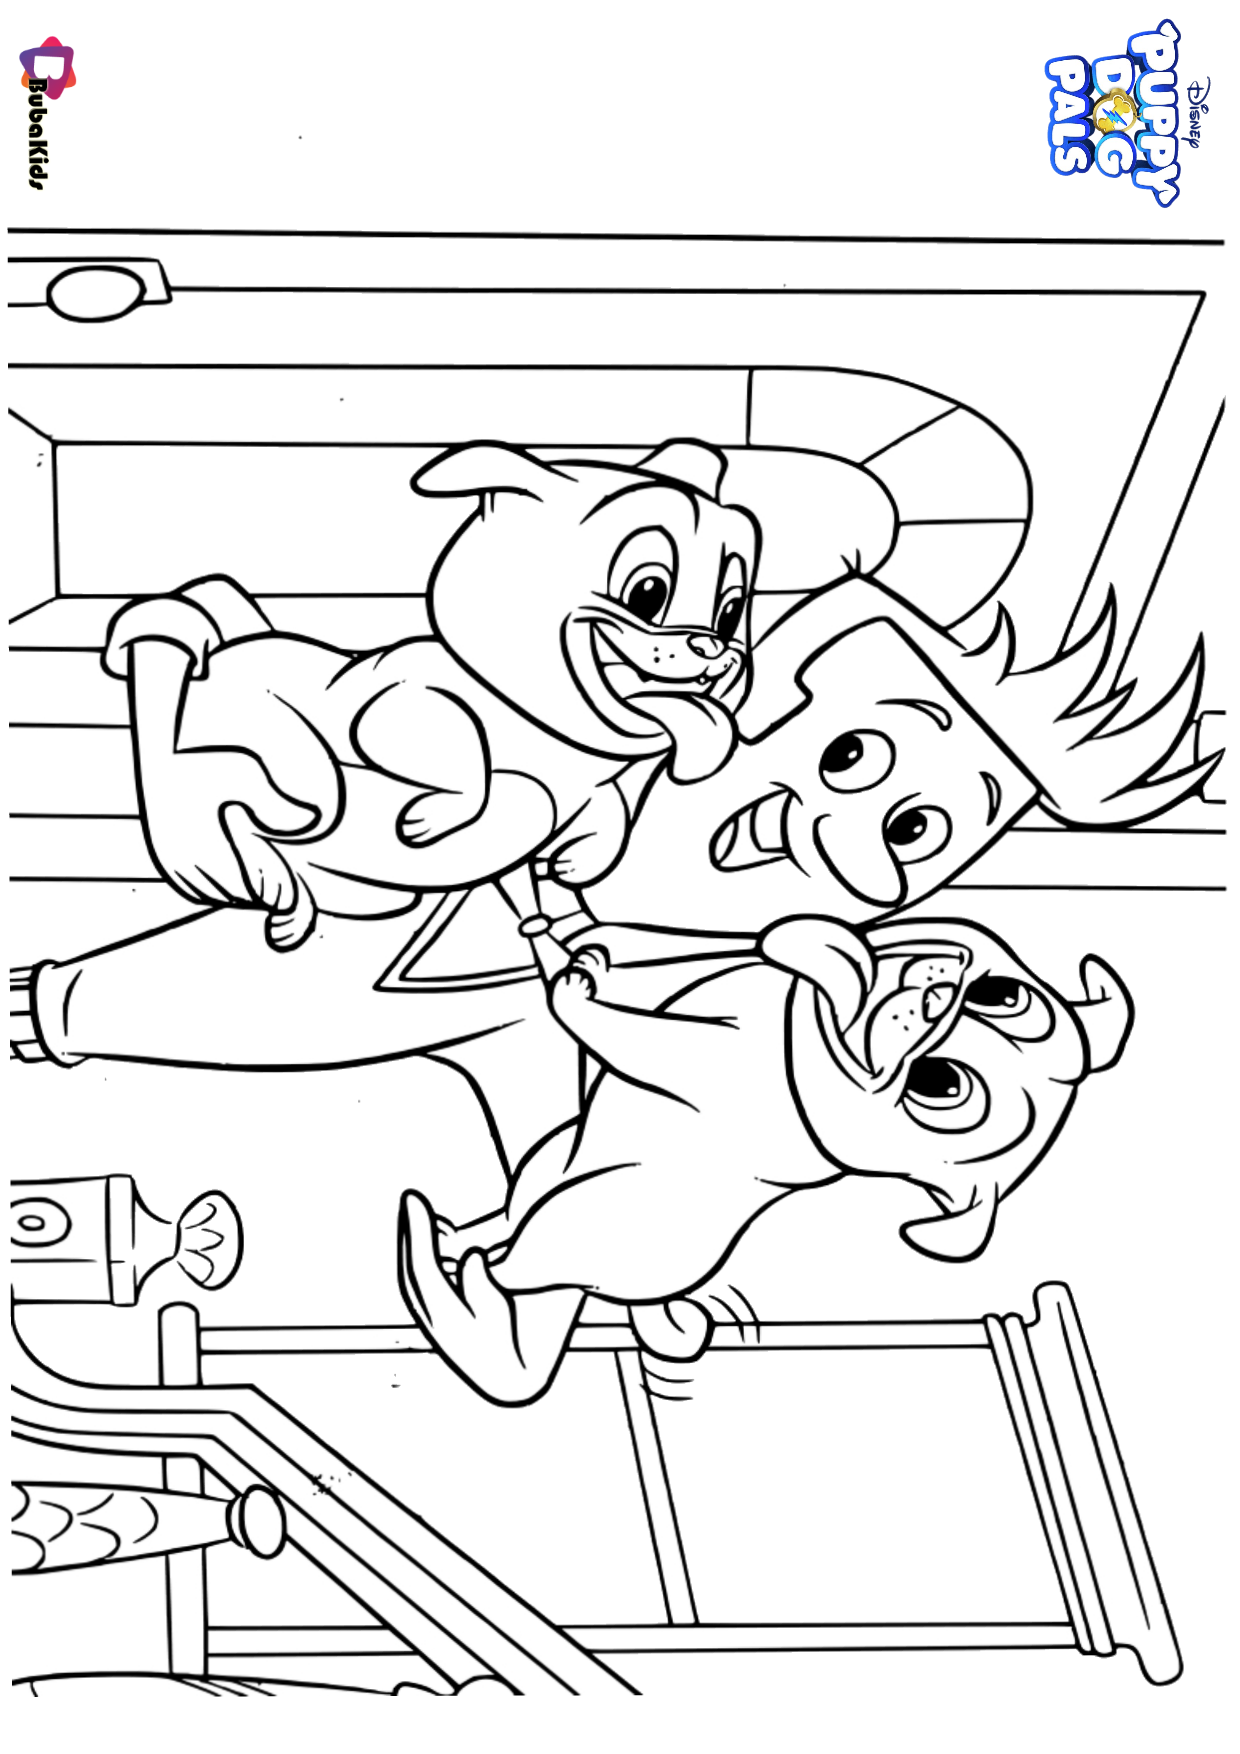 Free download to print Disney Puppy Dog Pals coloring page Wallpaper